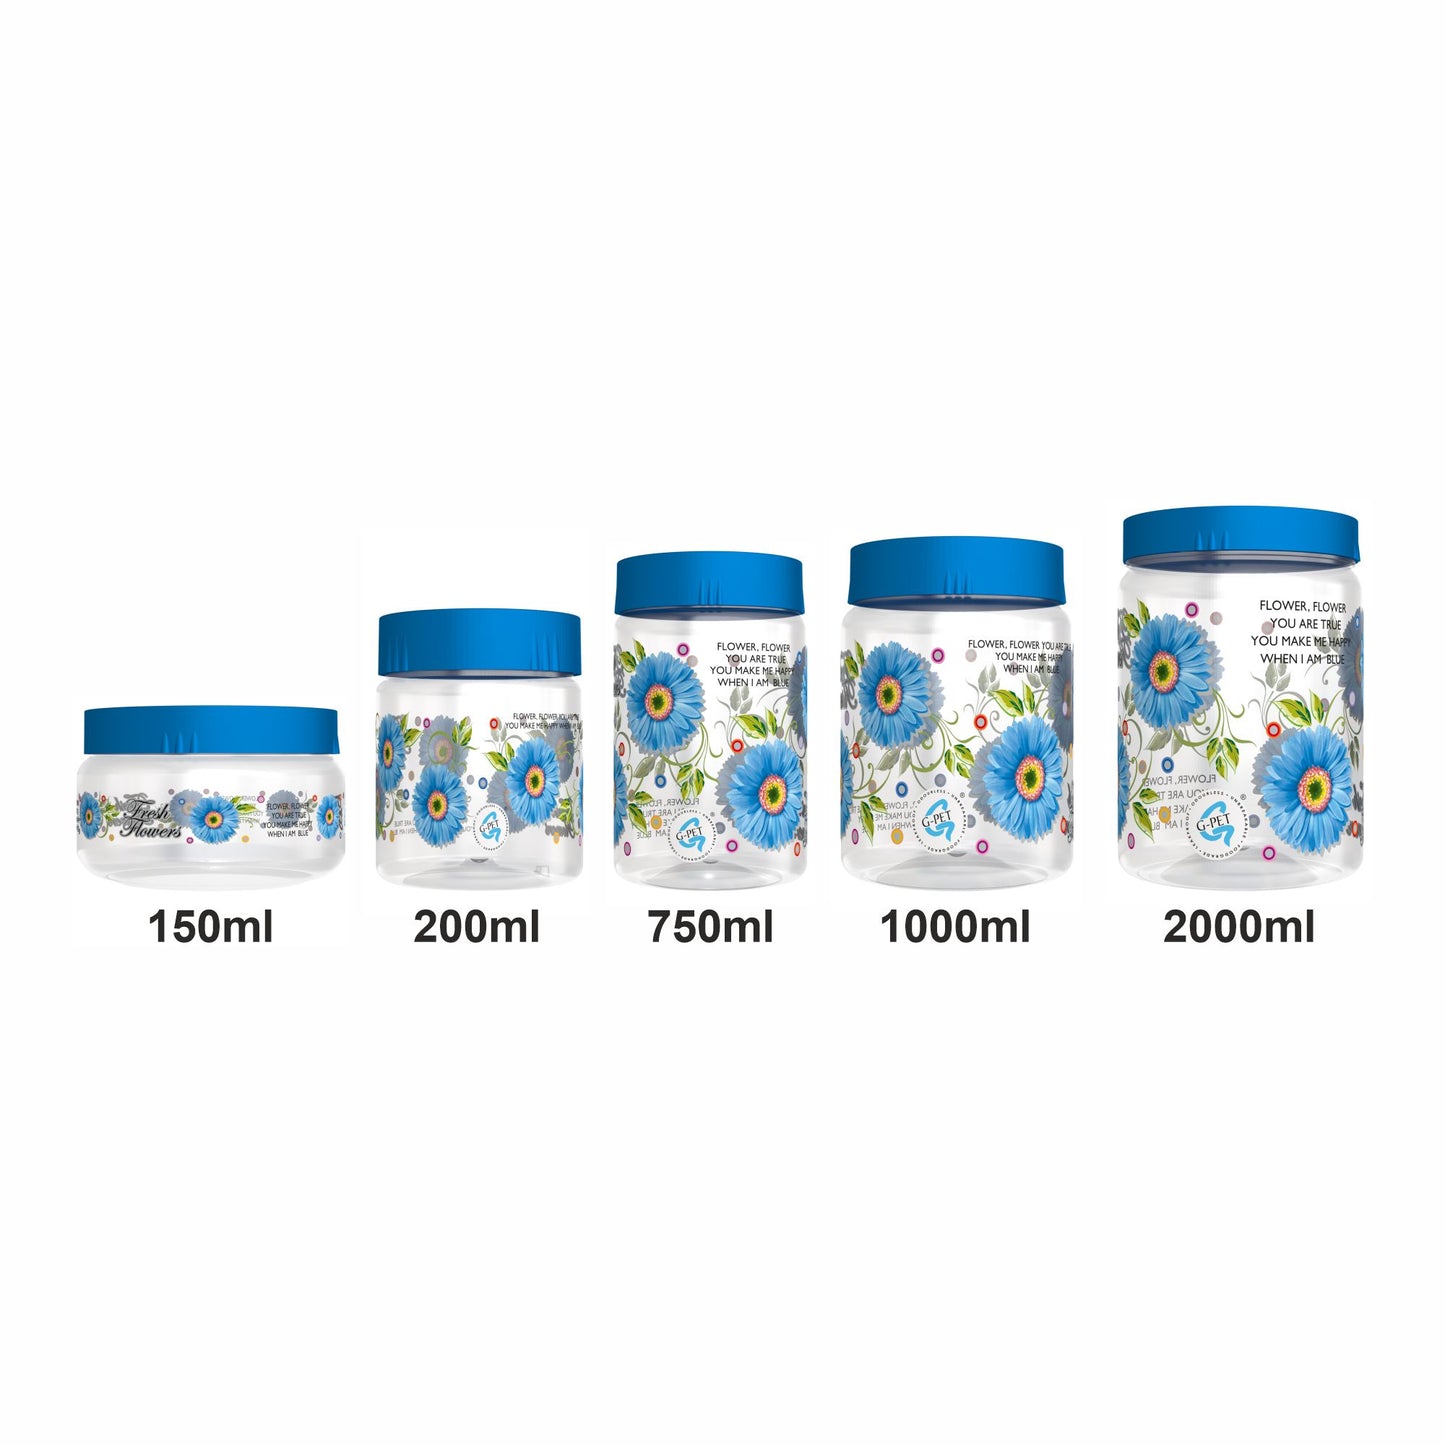 Print Magic Container Blue Pack of 15 - 2000ml (3 pcs), 1000ml (3 pcs), 750ml (3 pcs), 200ml (3 pcs), 150ml (3 pcs) Plastic Grocery Container